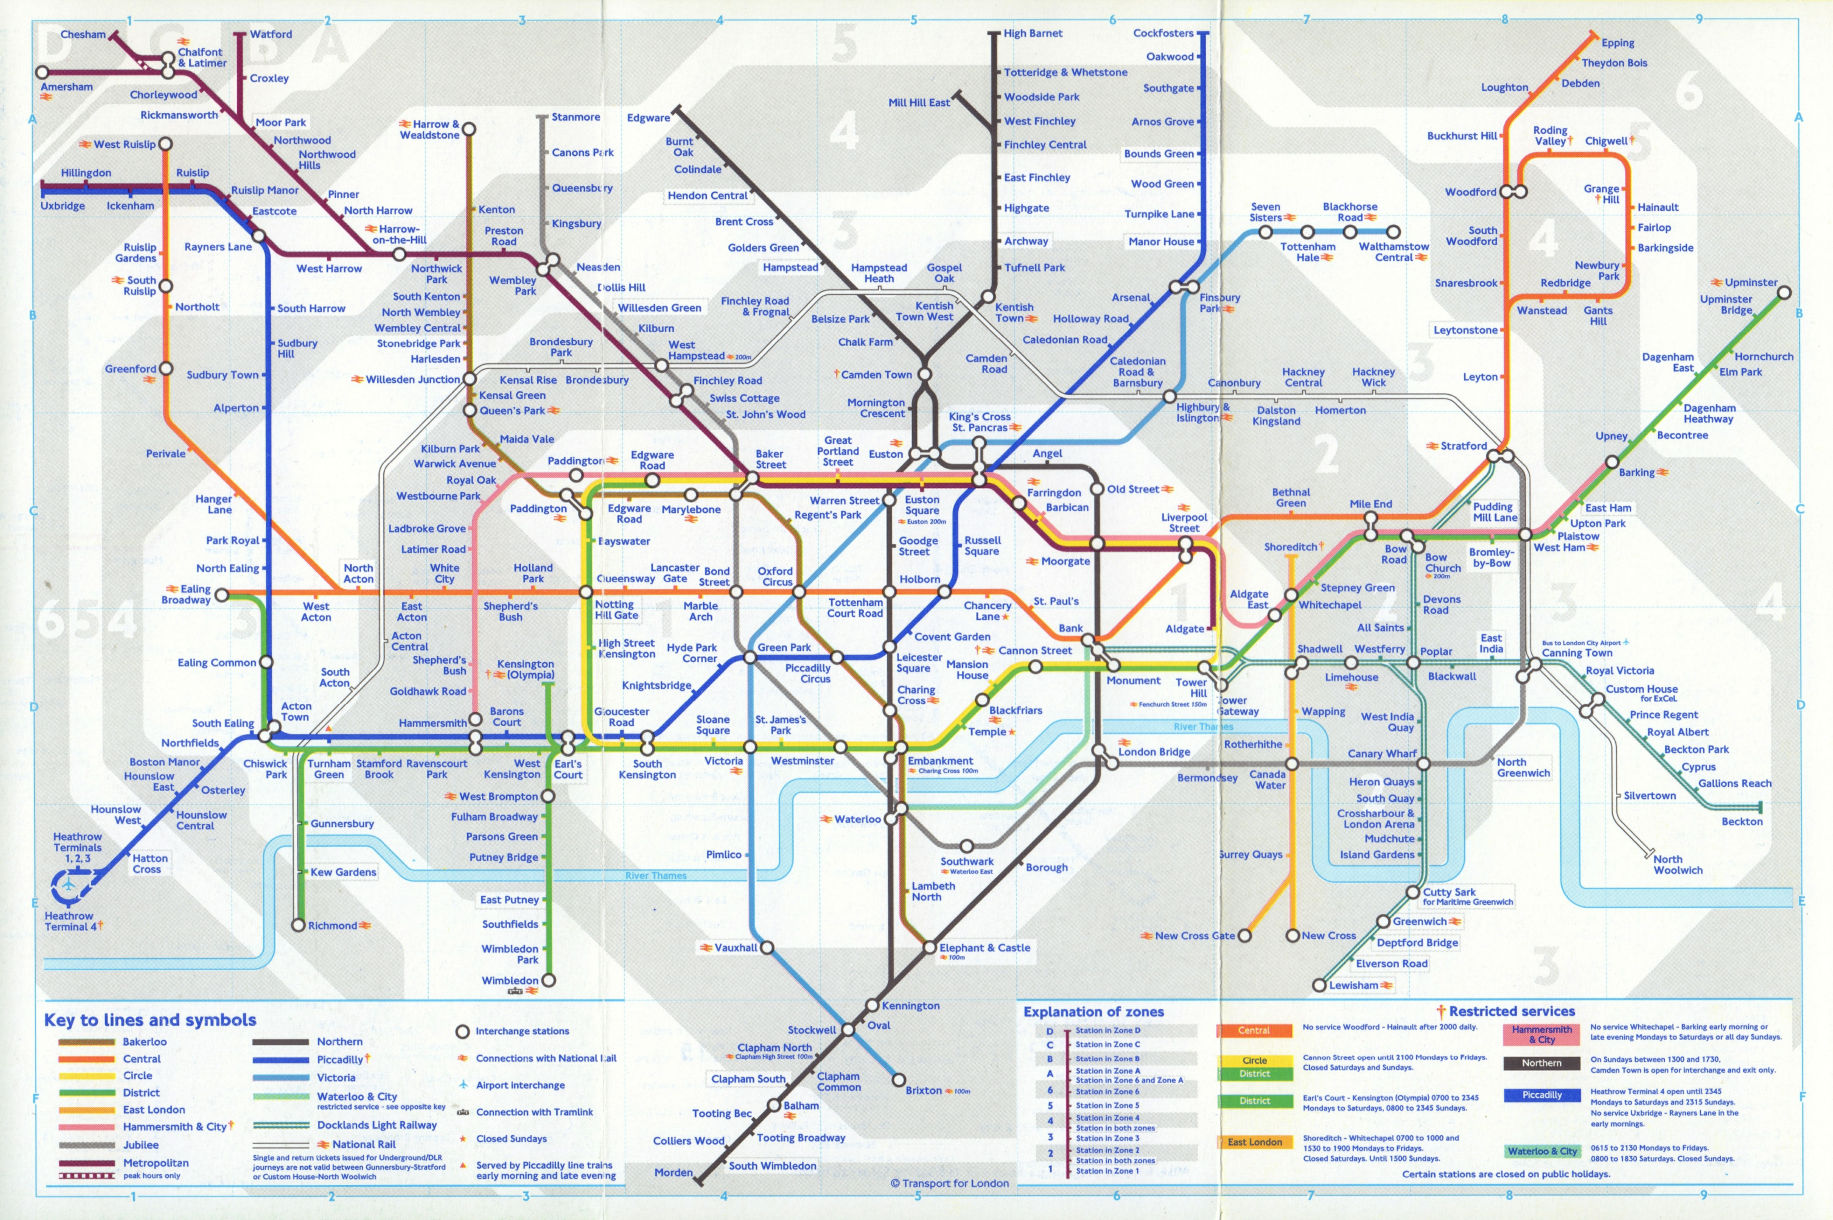 LONDON UNDERGROUND tube map. First map showing fare zones. May 2001 old